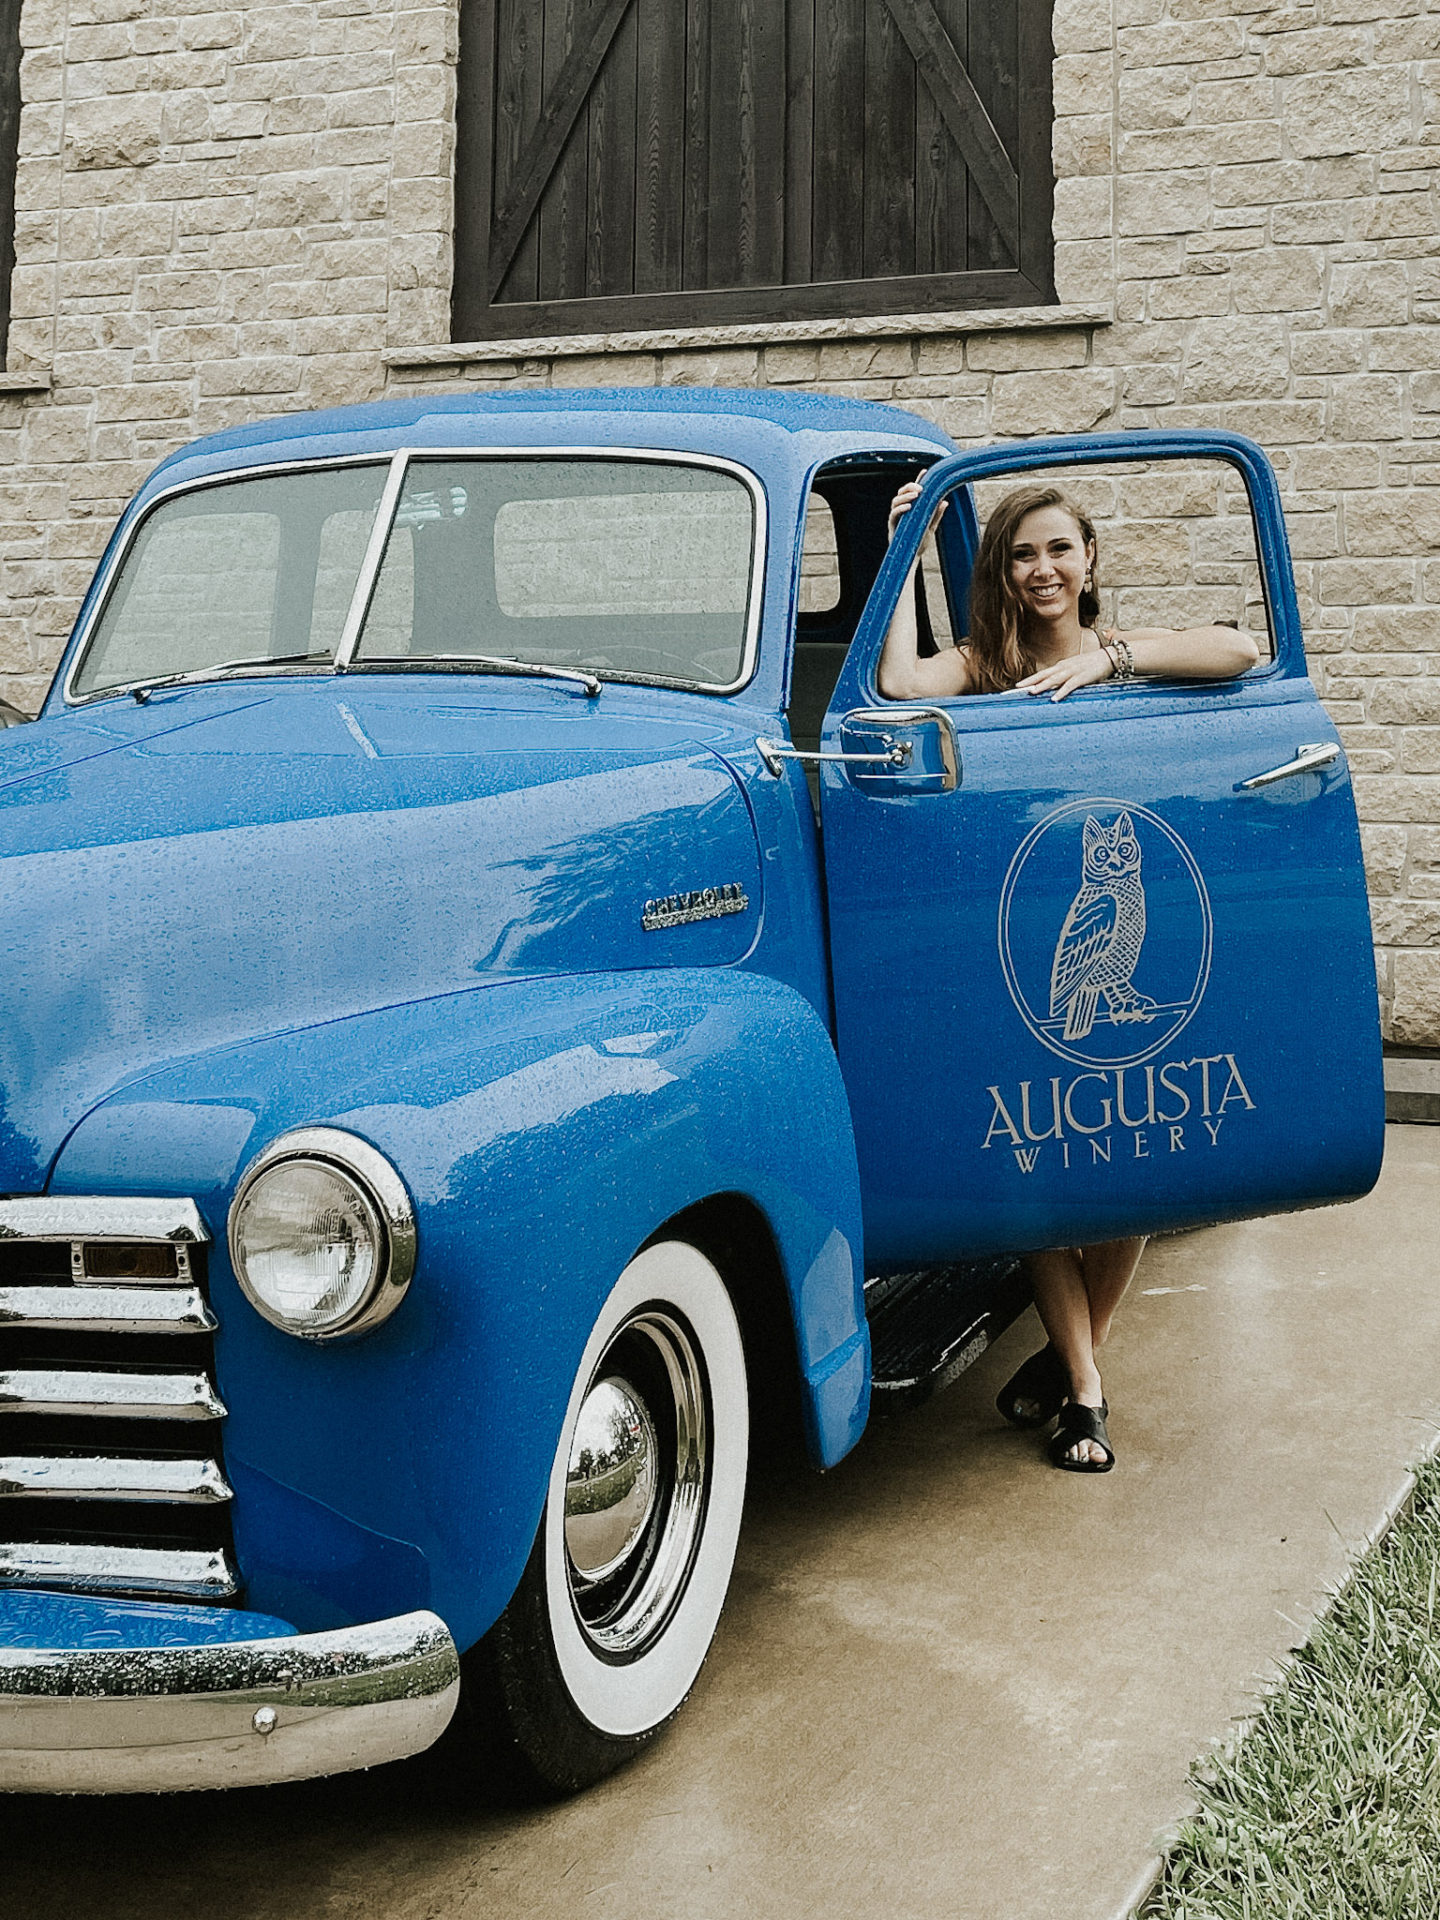 August winery blue truck